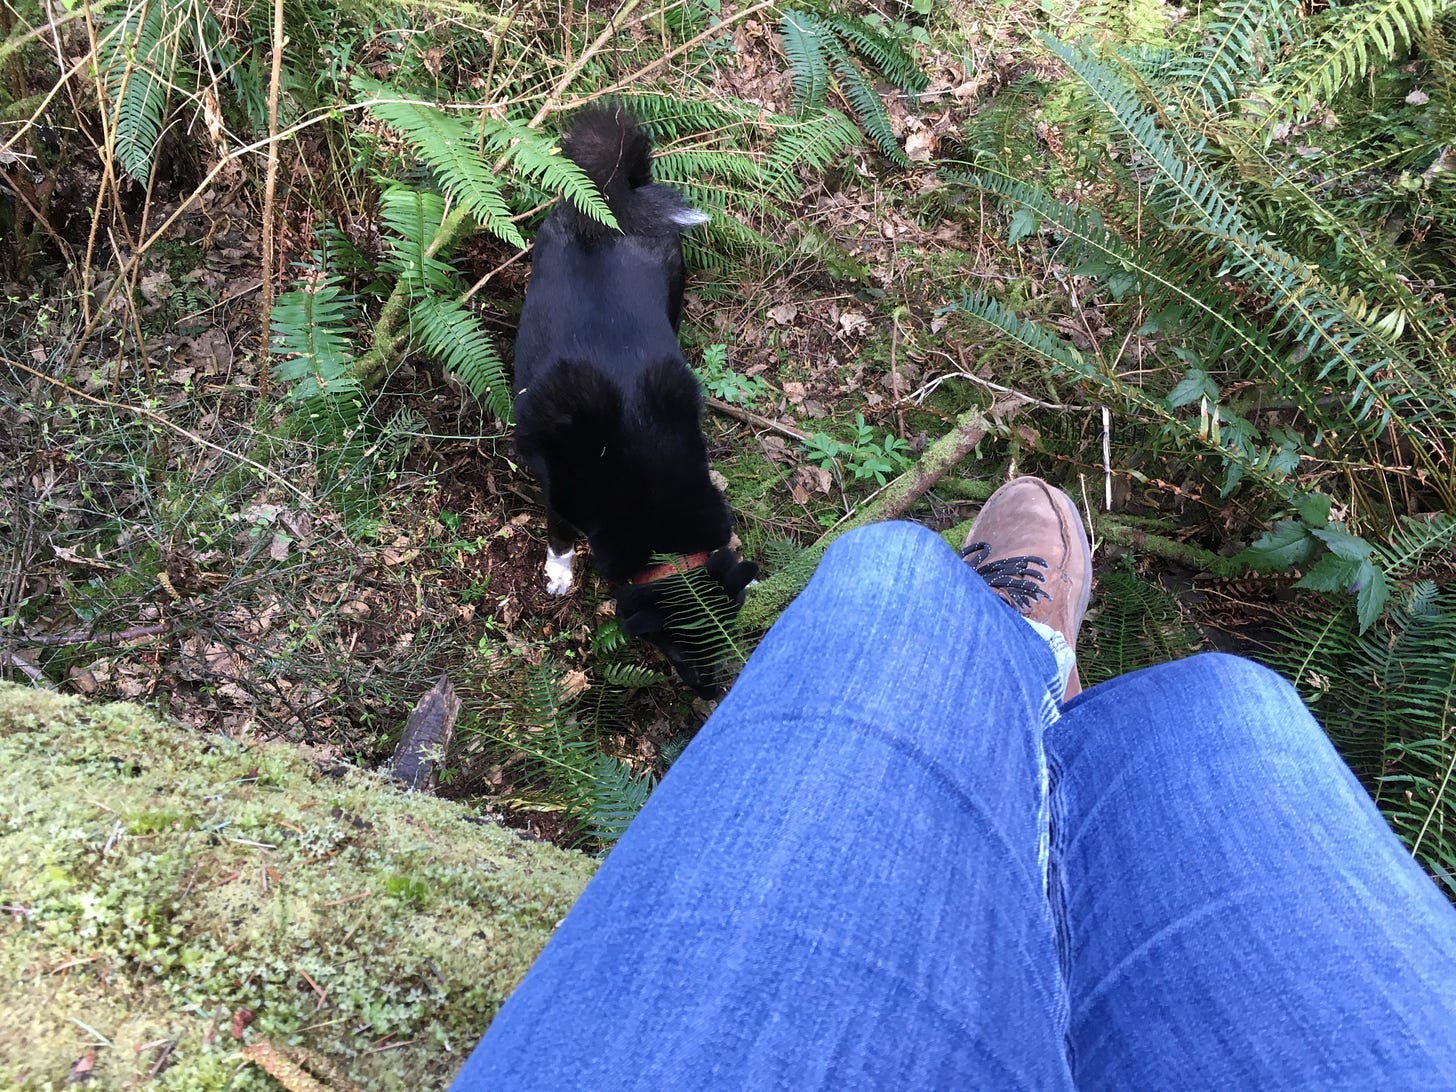 Cassandra's blue jean covered legs at bottom right of image with her brown leather boot visible (just one) she is taking the picture looking down from above. she is sitting atop a moss covered fallen tree that is resting over a gorge and about five feet below Ernest (mostly black and white dog) is sniffing the ground. surrounding him are green ferns, moss, branches of other trees and fallen leaves.